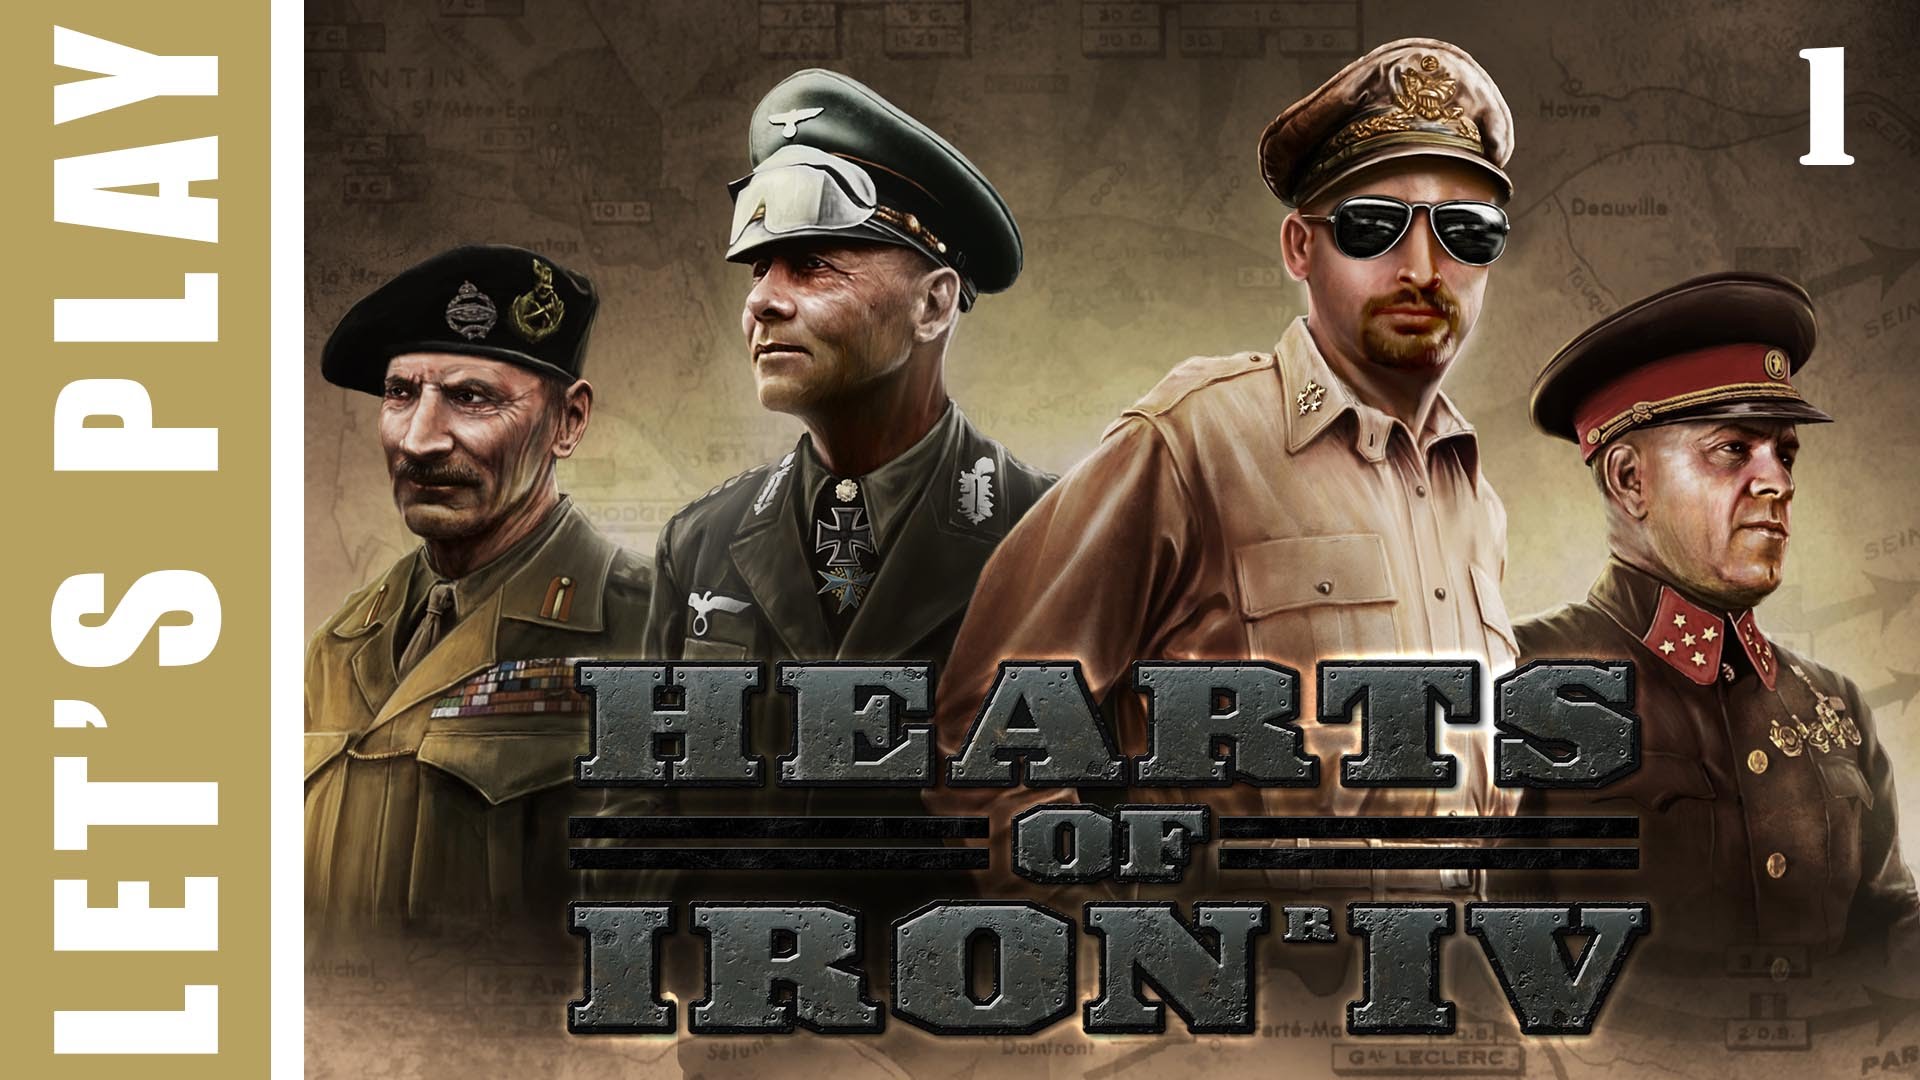 Hearts of Iron IV Germany Wins World War 2 Let’s Play 1